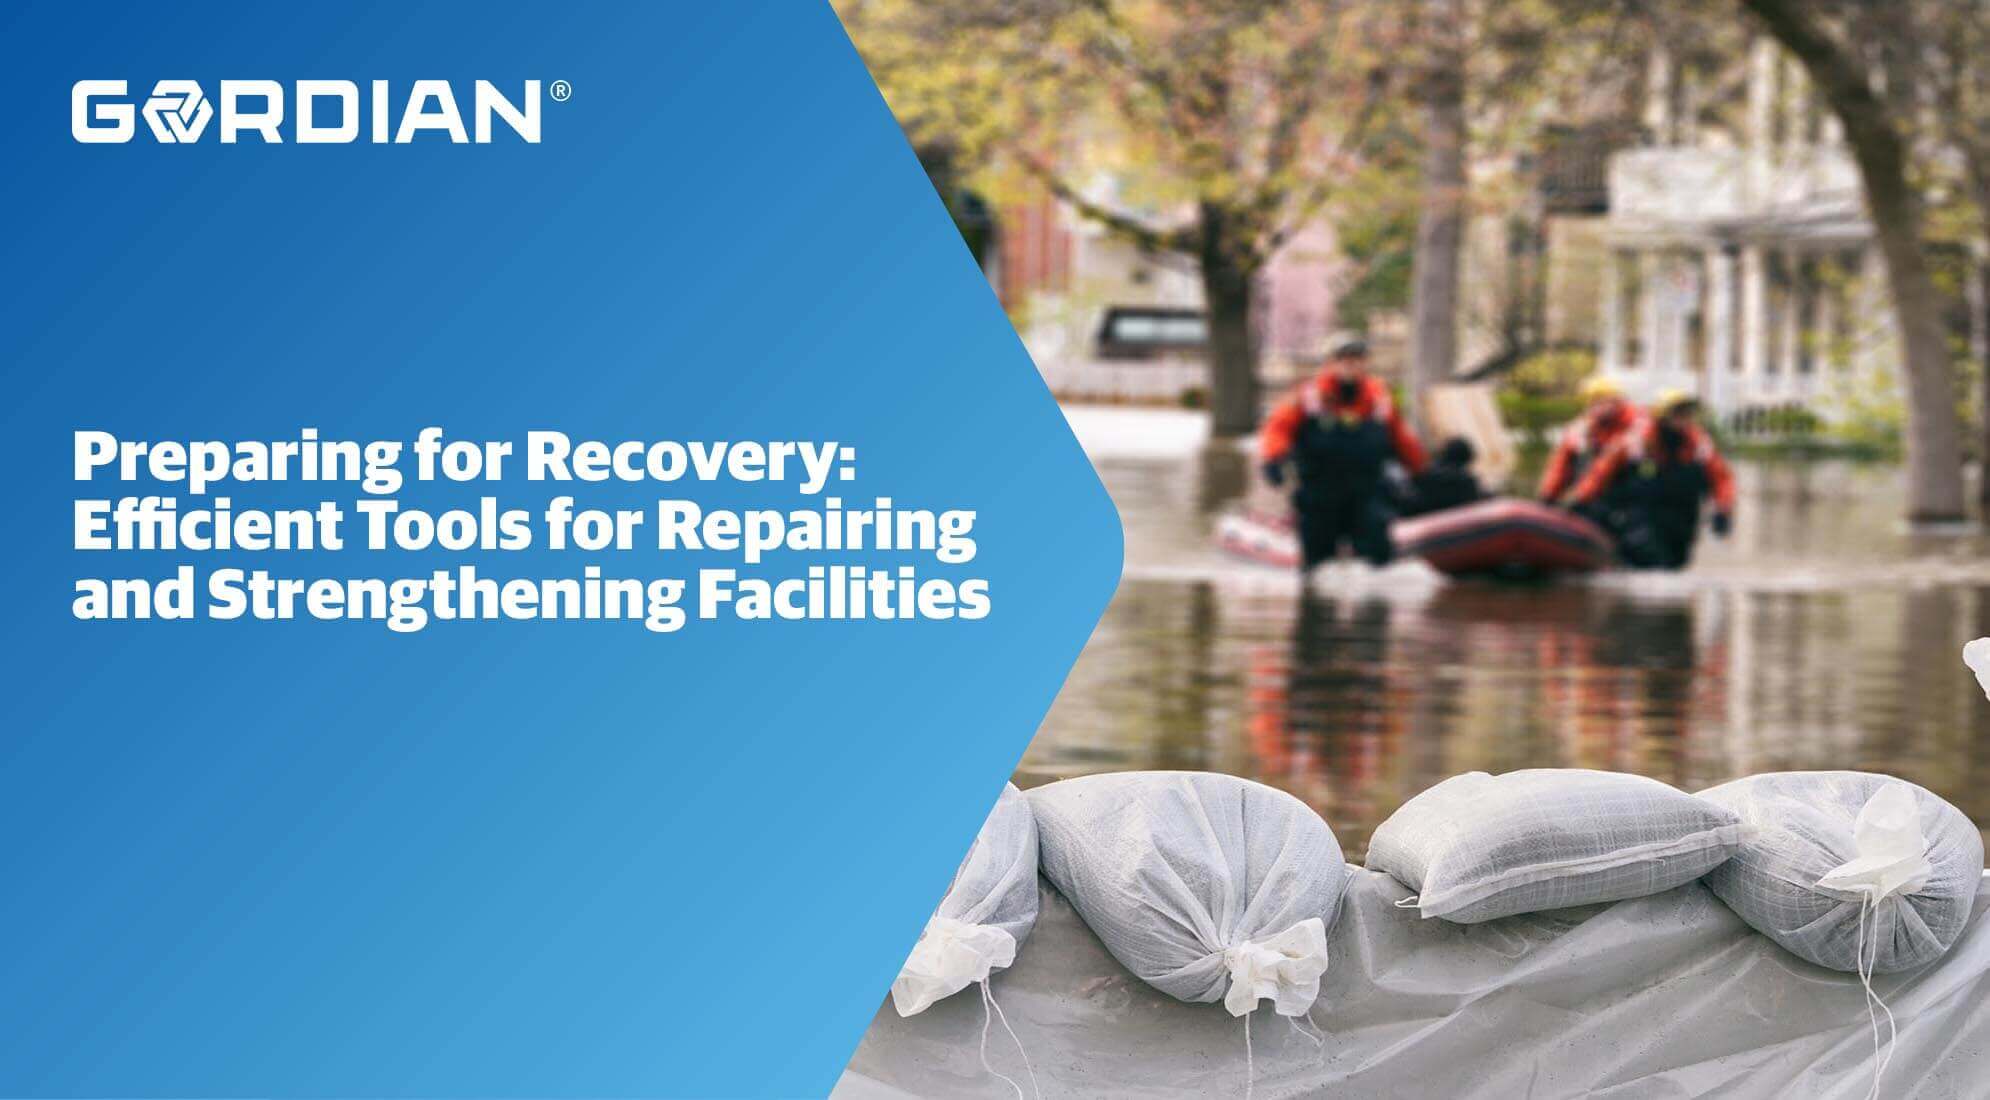 Preparing for Recovery: Efficient Tools for Repairing and Strengthening Facilities 3